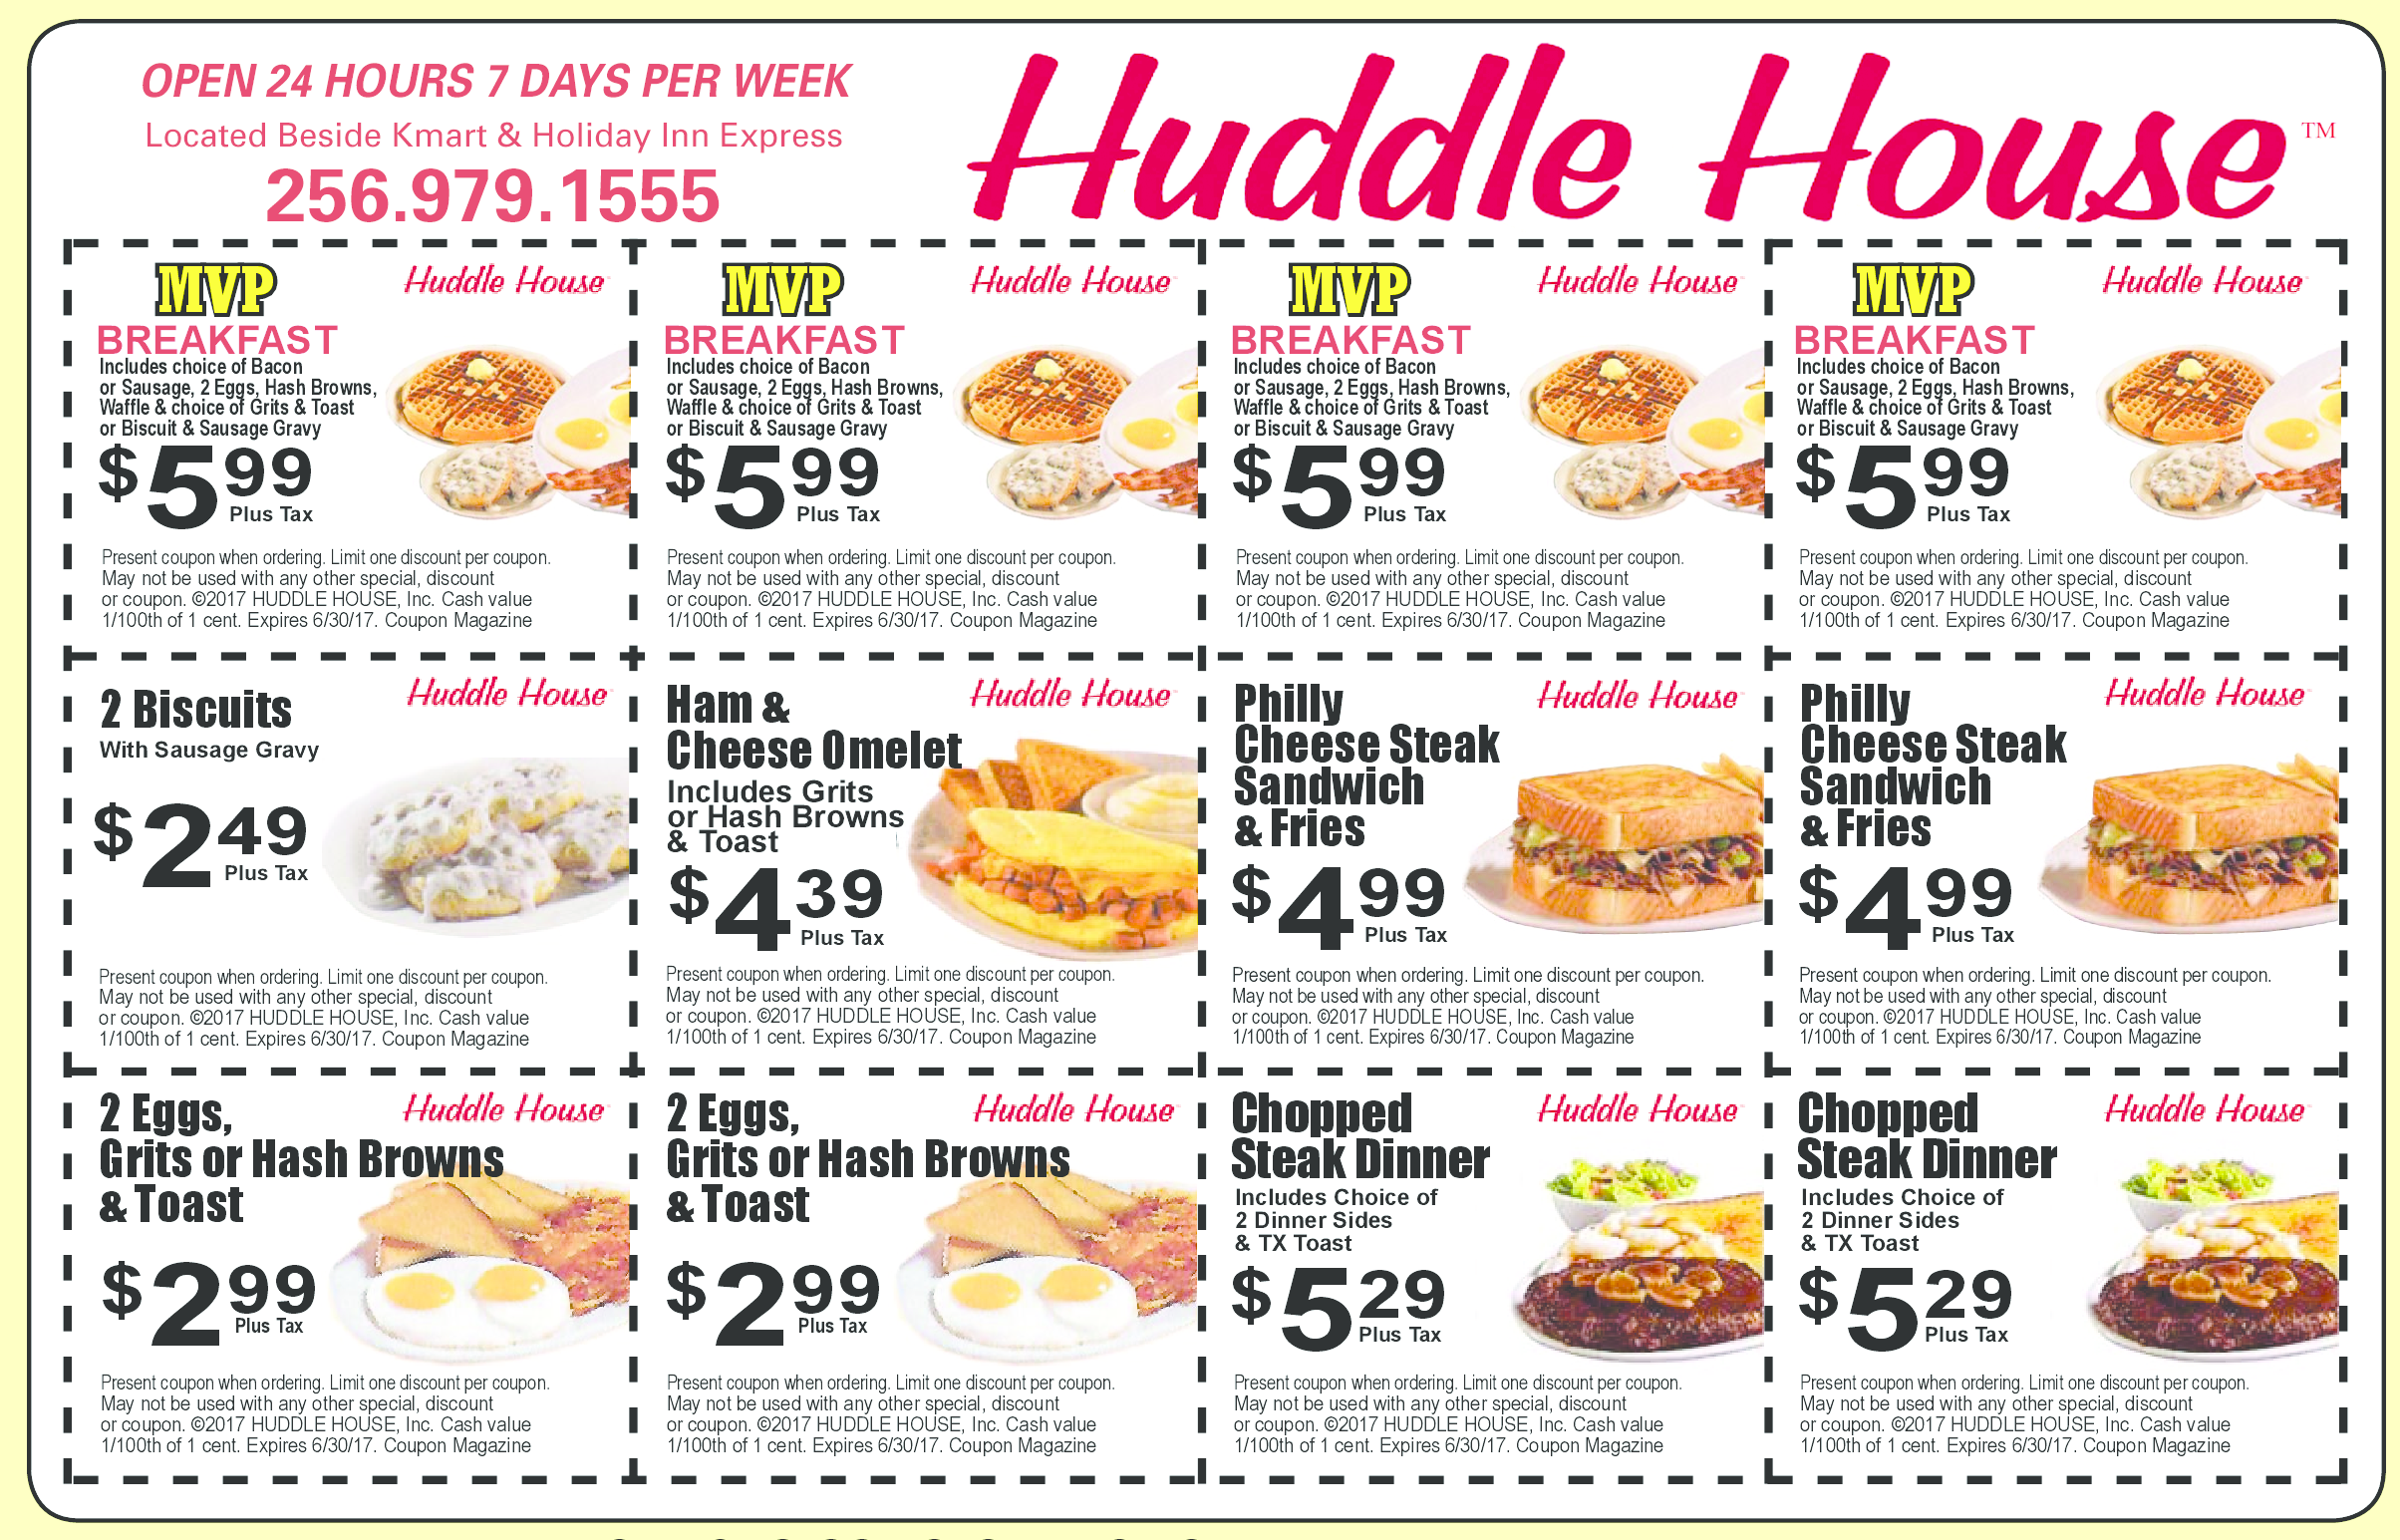 Printable Local Coupons, Free Restaurant Coupons Online - Hometown Values